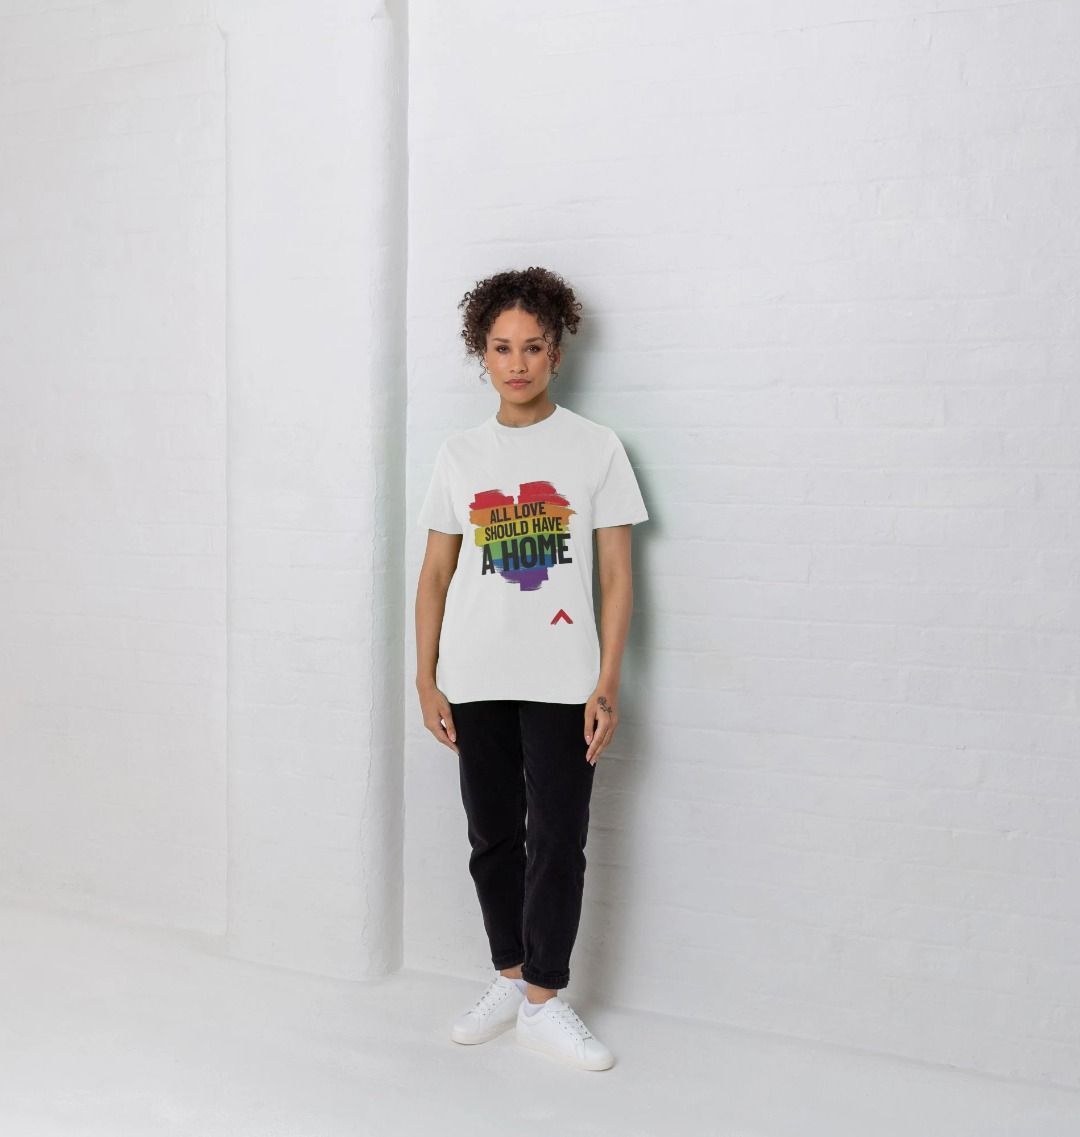 model wearing white all love should have a home t-shirt against a white backdrop, tshirt has a rainbow heart and slogan overlay reads "all love should have a home"